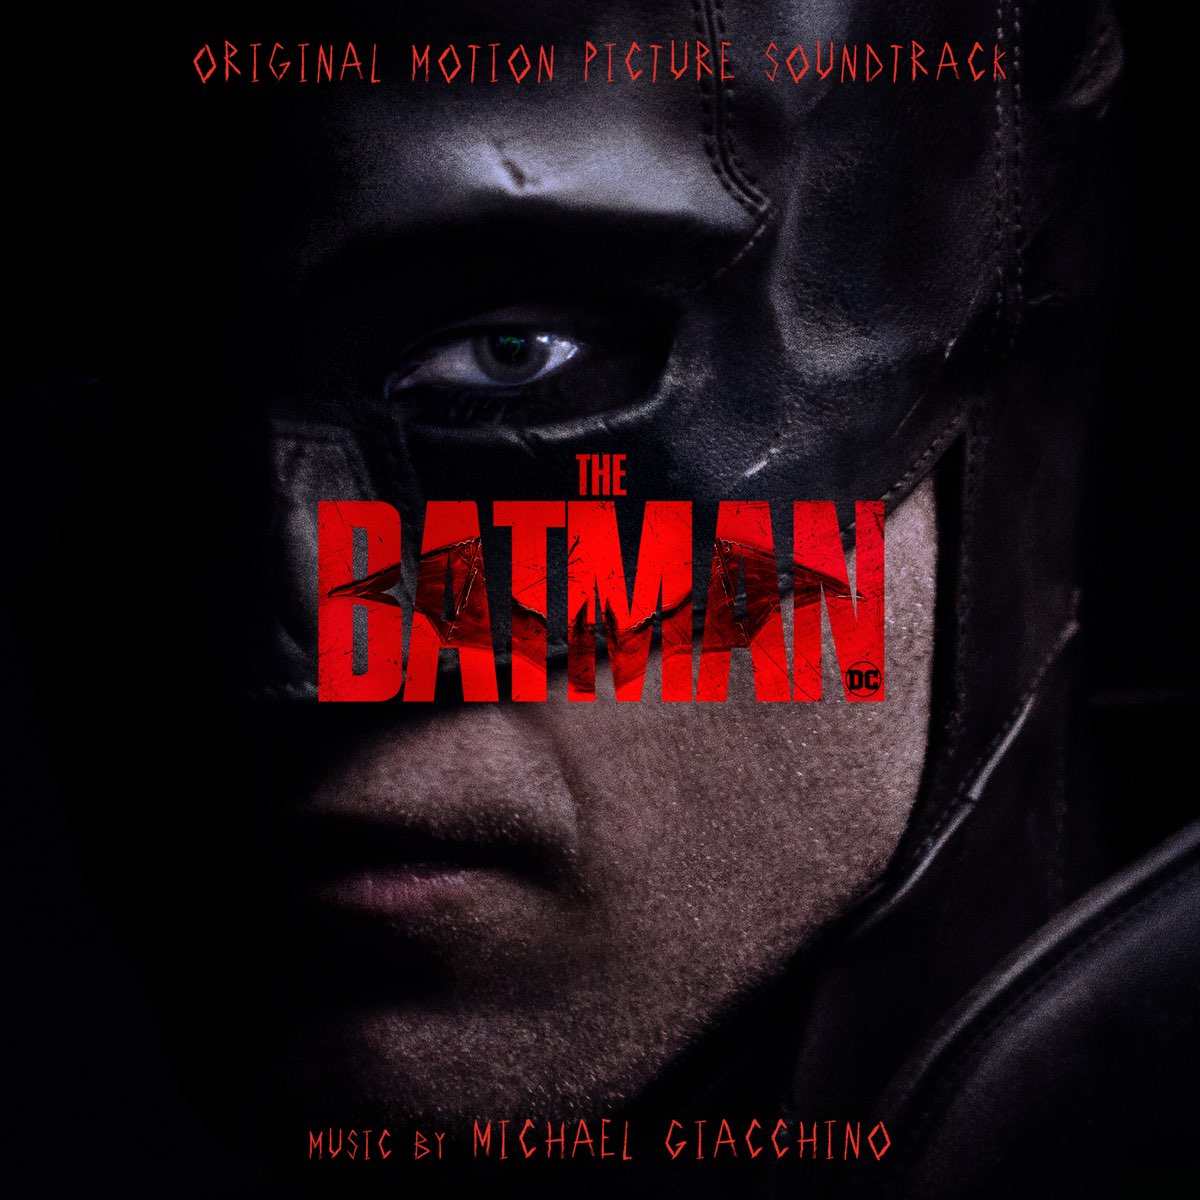 The Batman (Original Motion Picture Soundtrack) by Michael Giacchino on  Apple Music